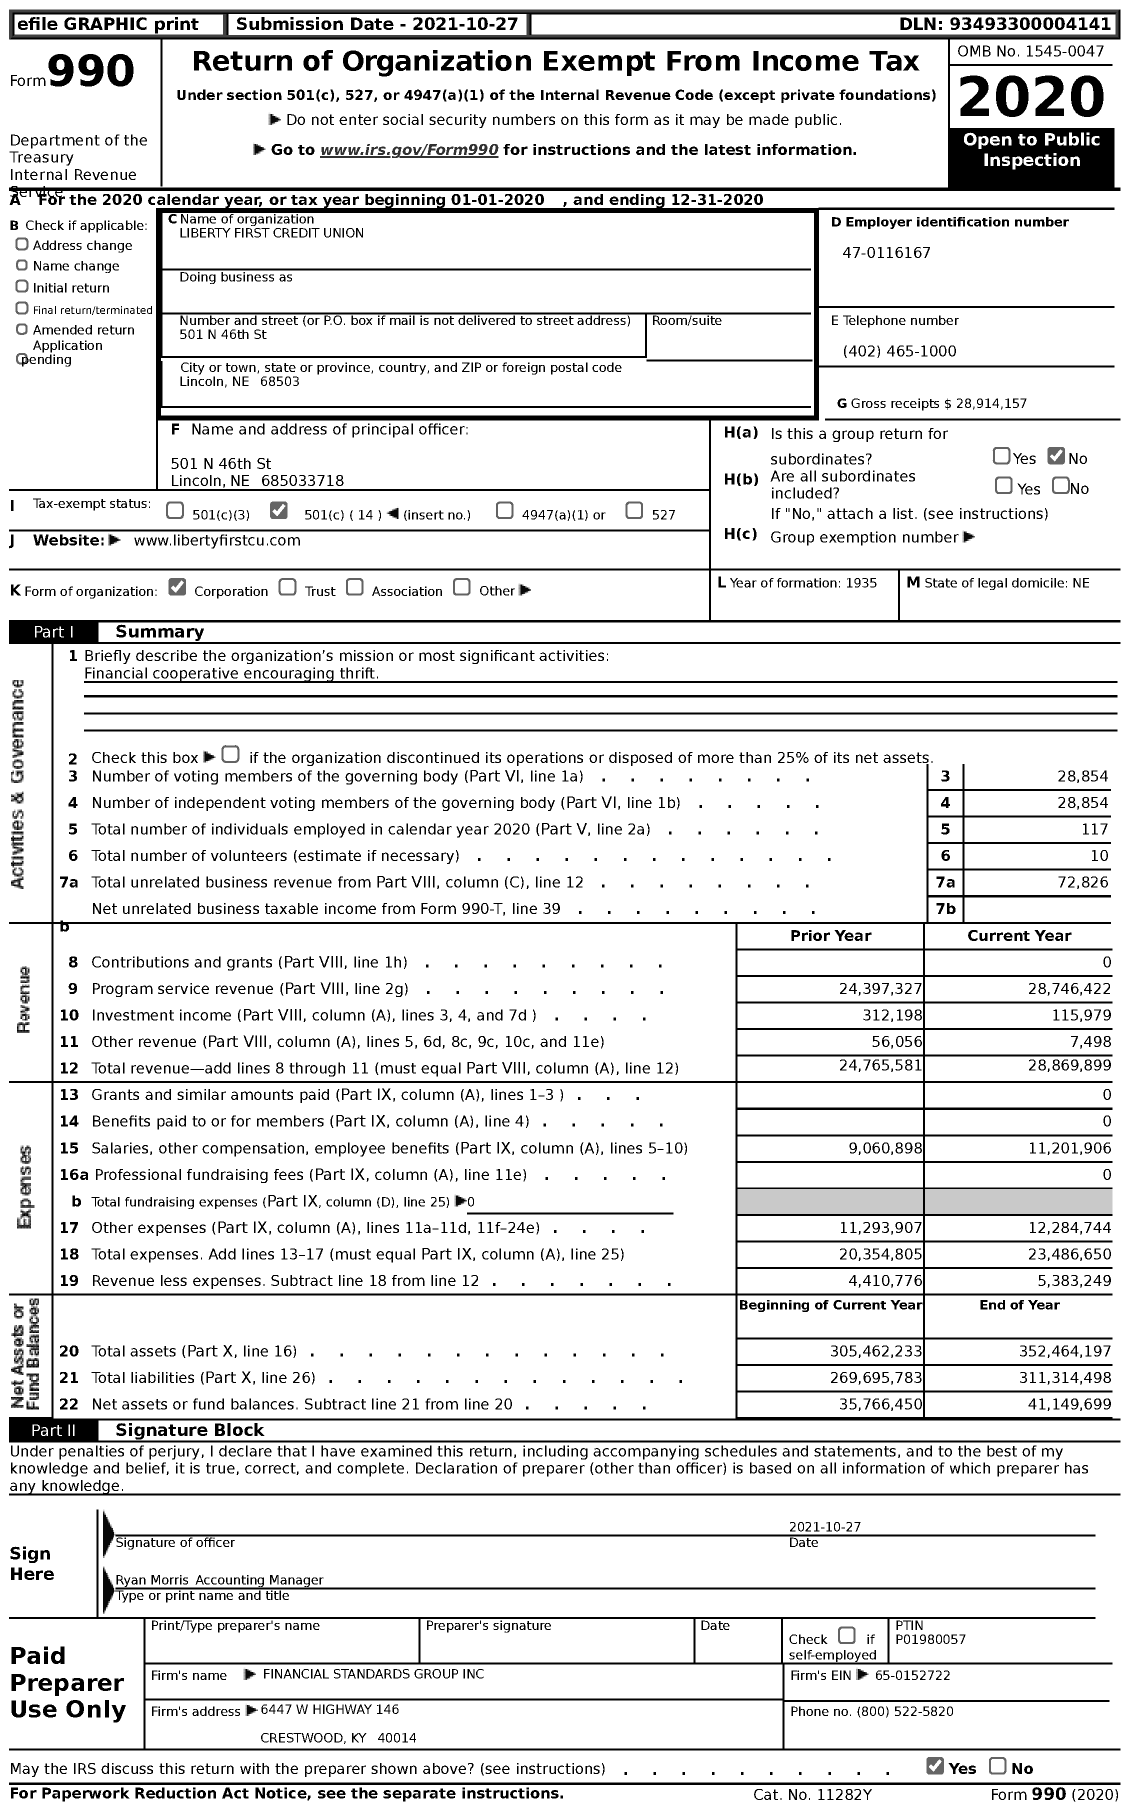 Image of first page of 2020 Form 990 for Liberty First Credit Union